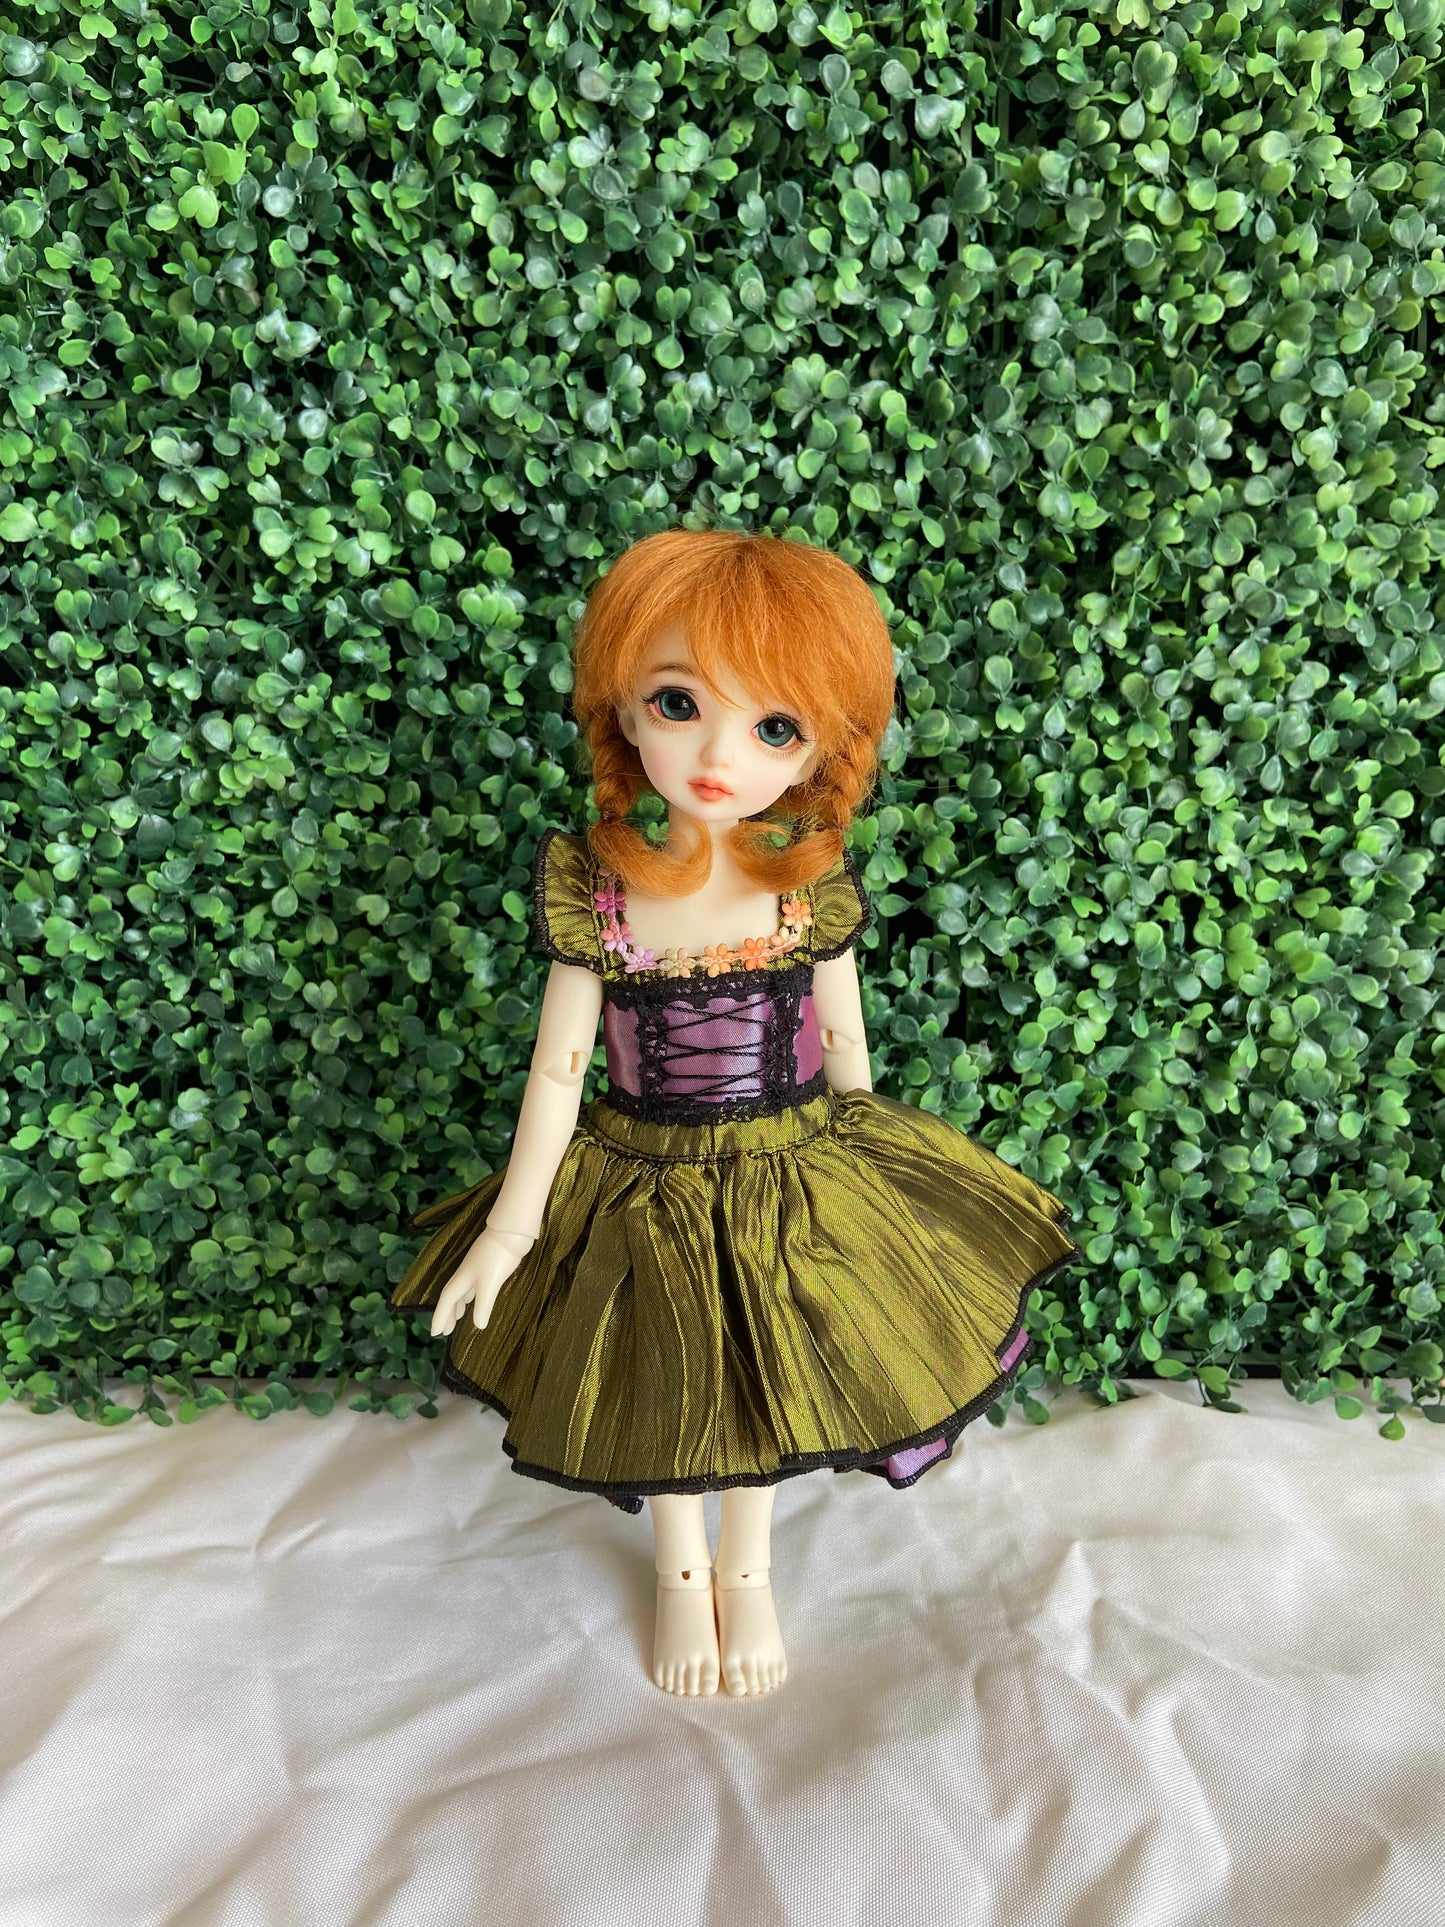 1/6 girl doll Anna with makeup,  wig , clothes and eyes